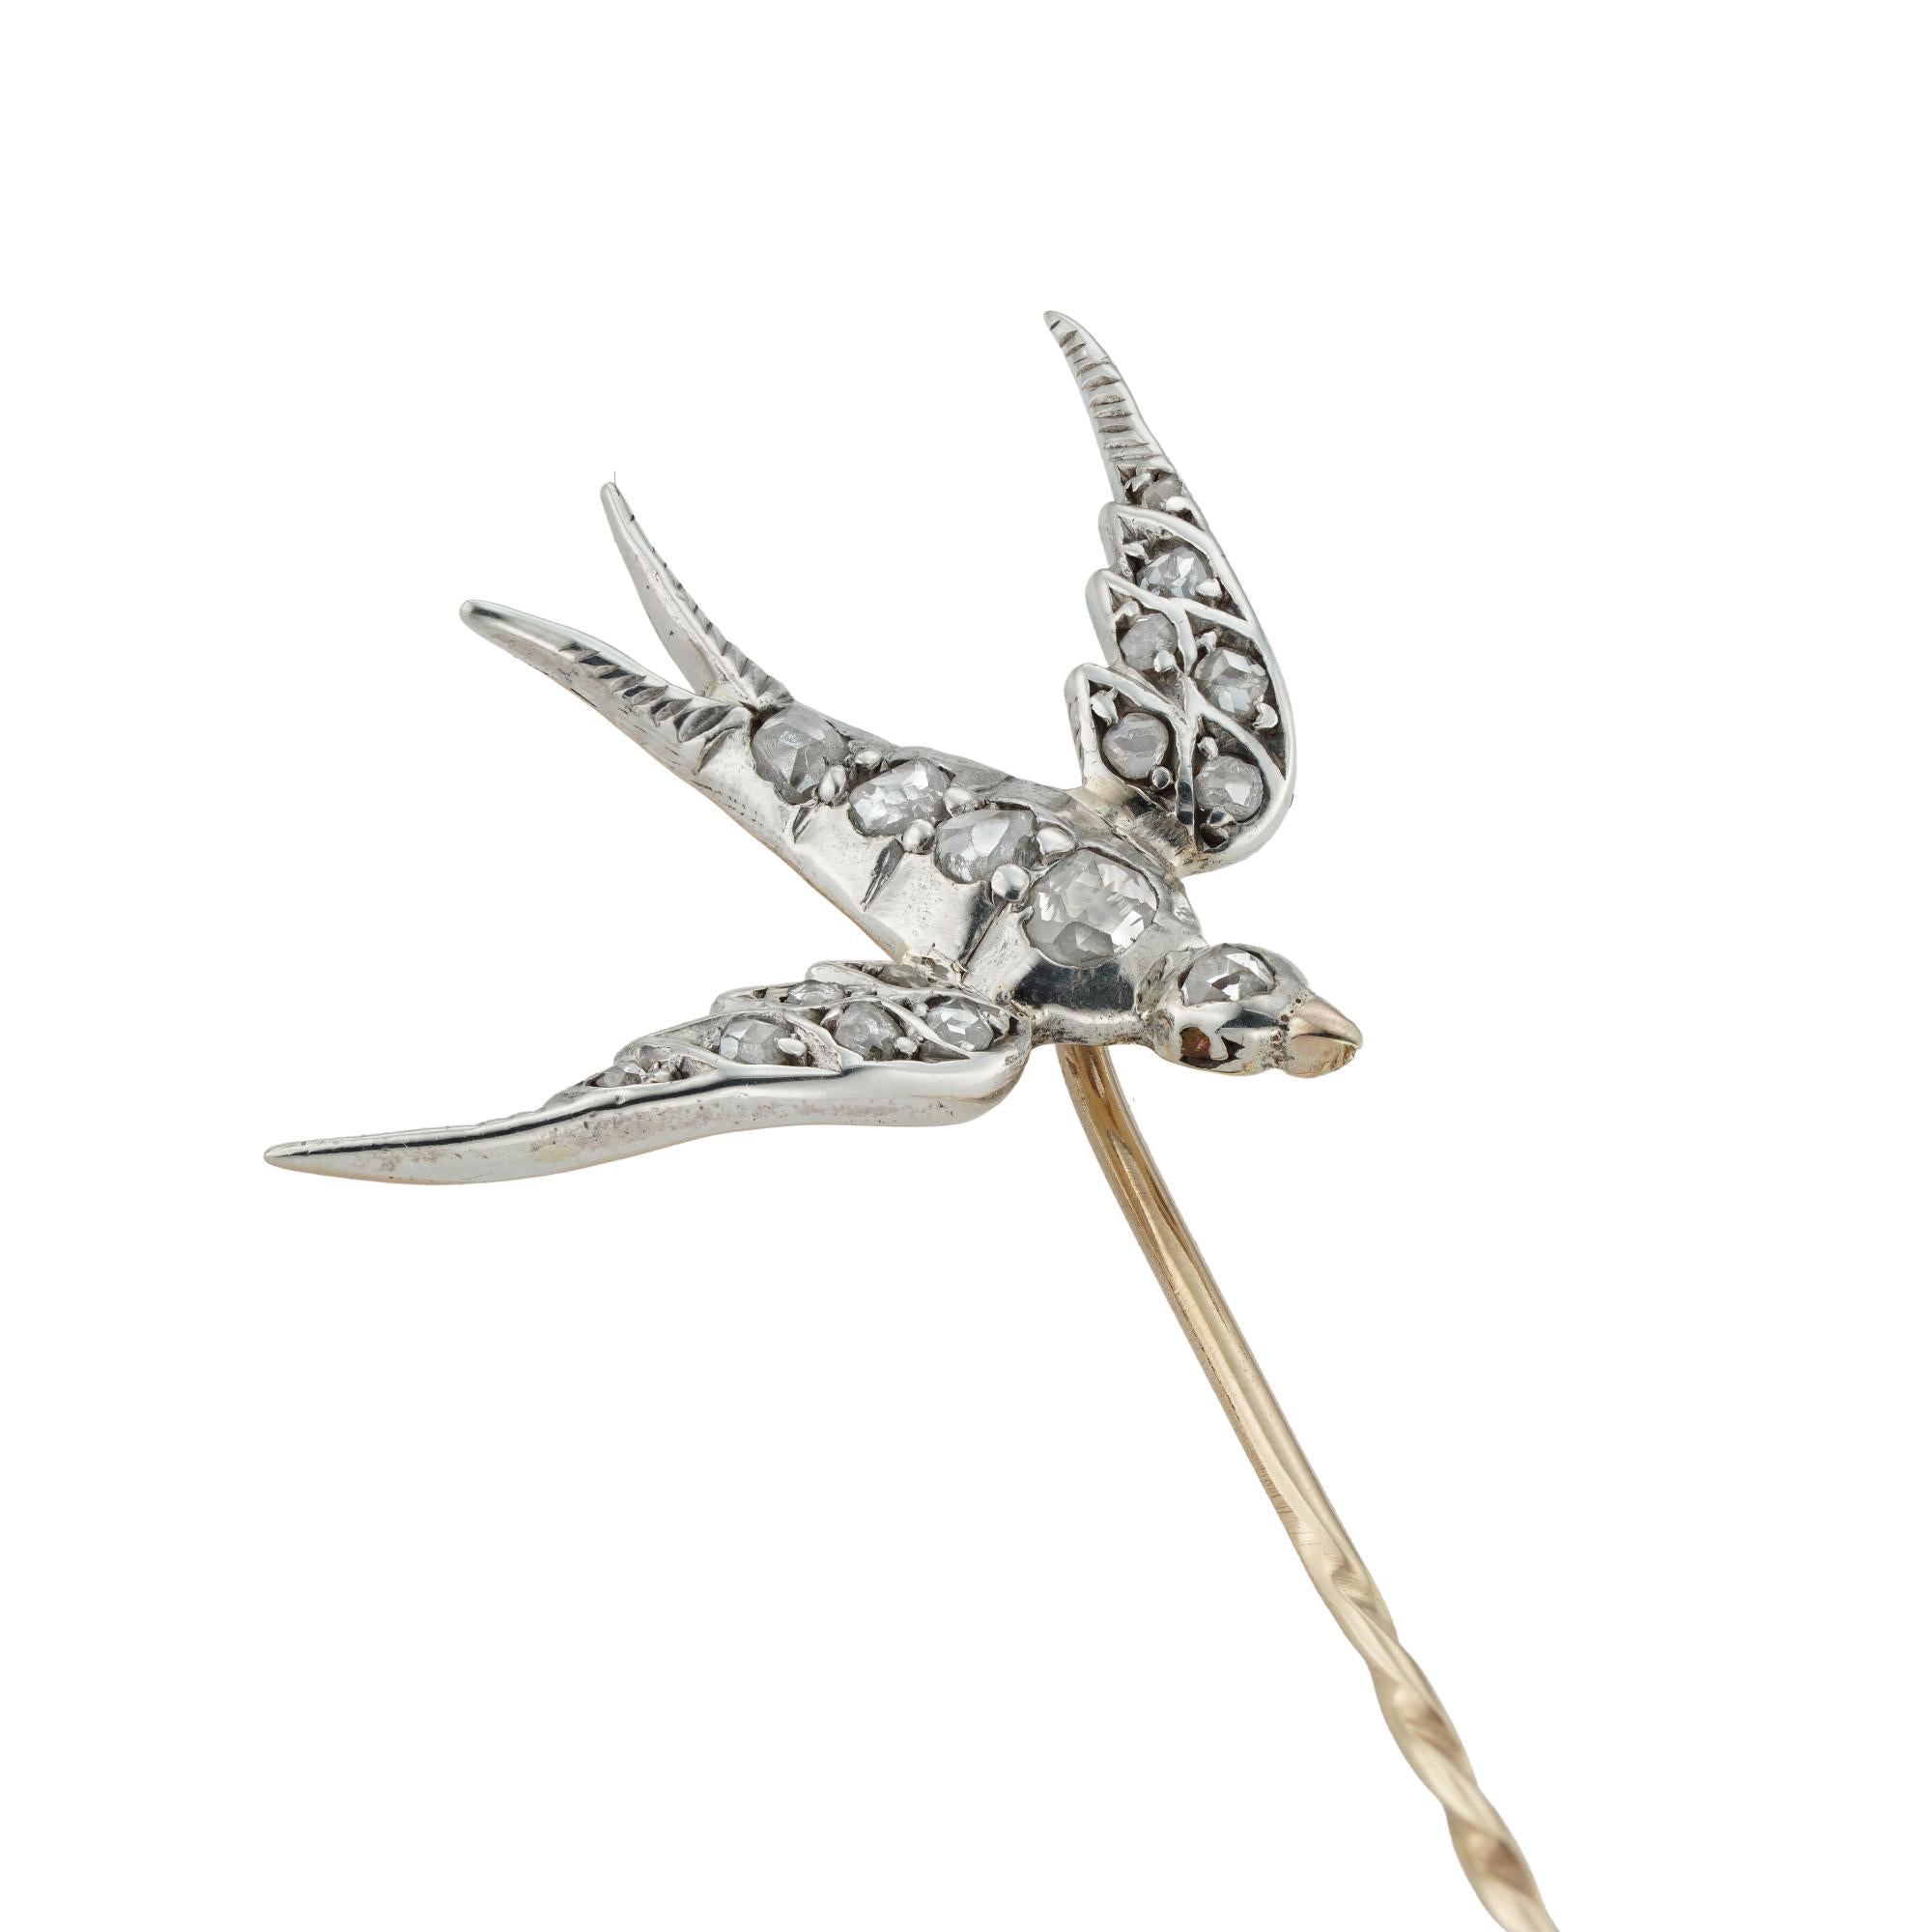 A late Victorian diamond-set swallow stick-pin, the nineteen rose-cut diamonds set in silver to yellow gold back, with gold pin fitting, measuring approximately 2.8 x 2.1cm, the pin measuring 6.8cm long, gross weight 2.4g.
 A sweet late Victorian